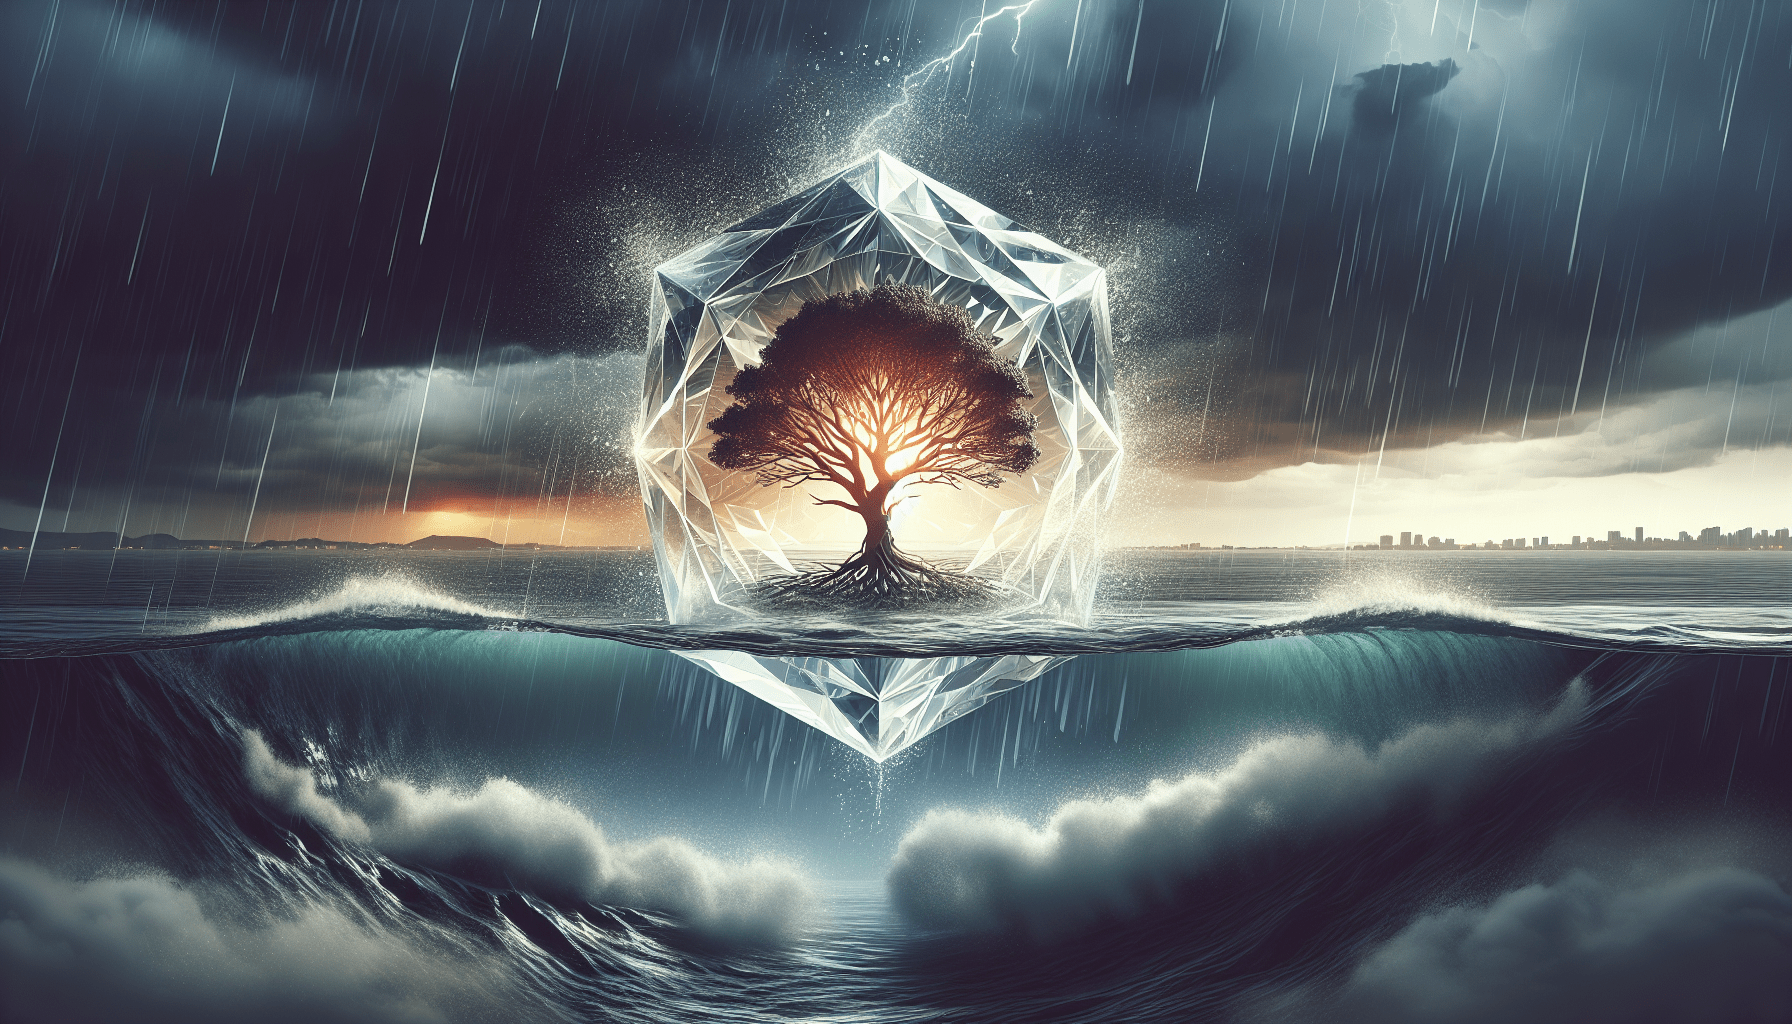 Digital artwork depicting a striking tree inside a transparent crystal octahedron, centered above a reflective water body under a stormy sky with lightning and heavy rain, with city skyline in the background.